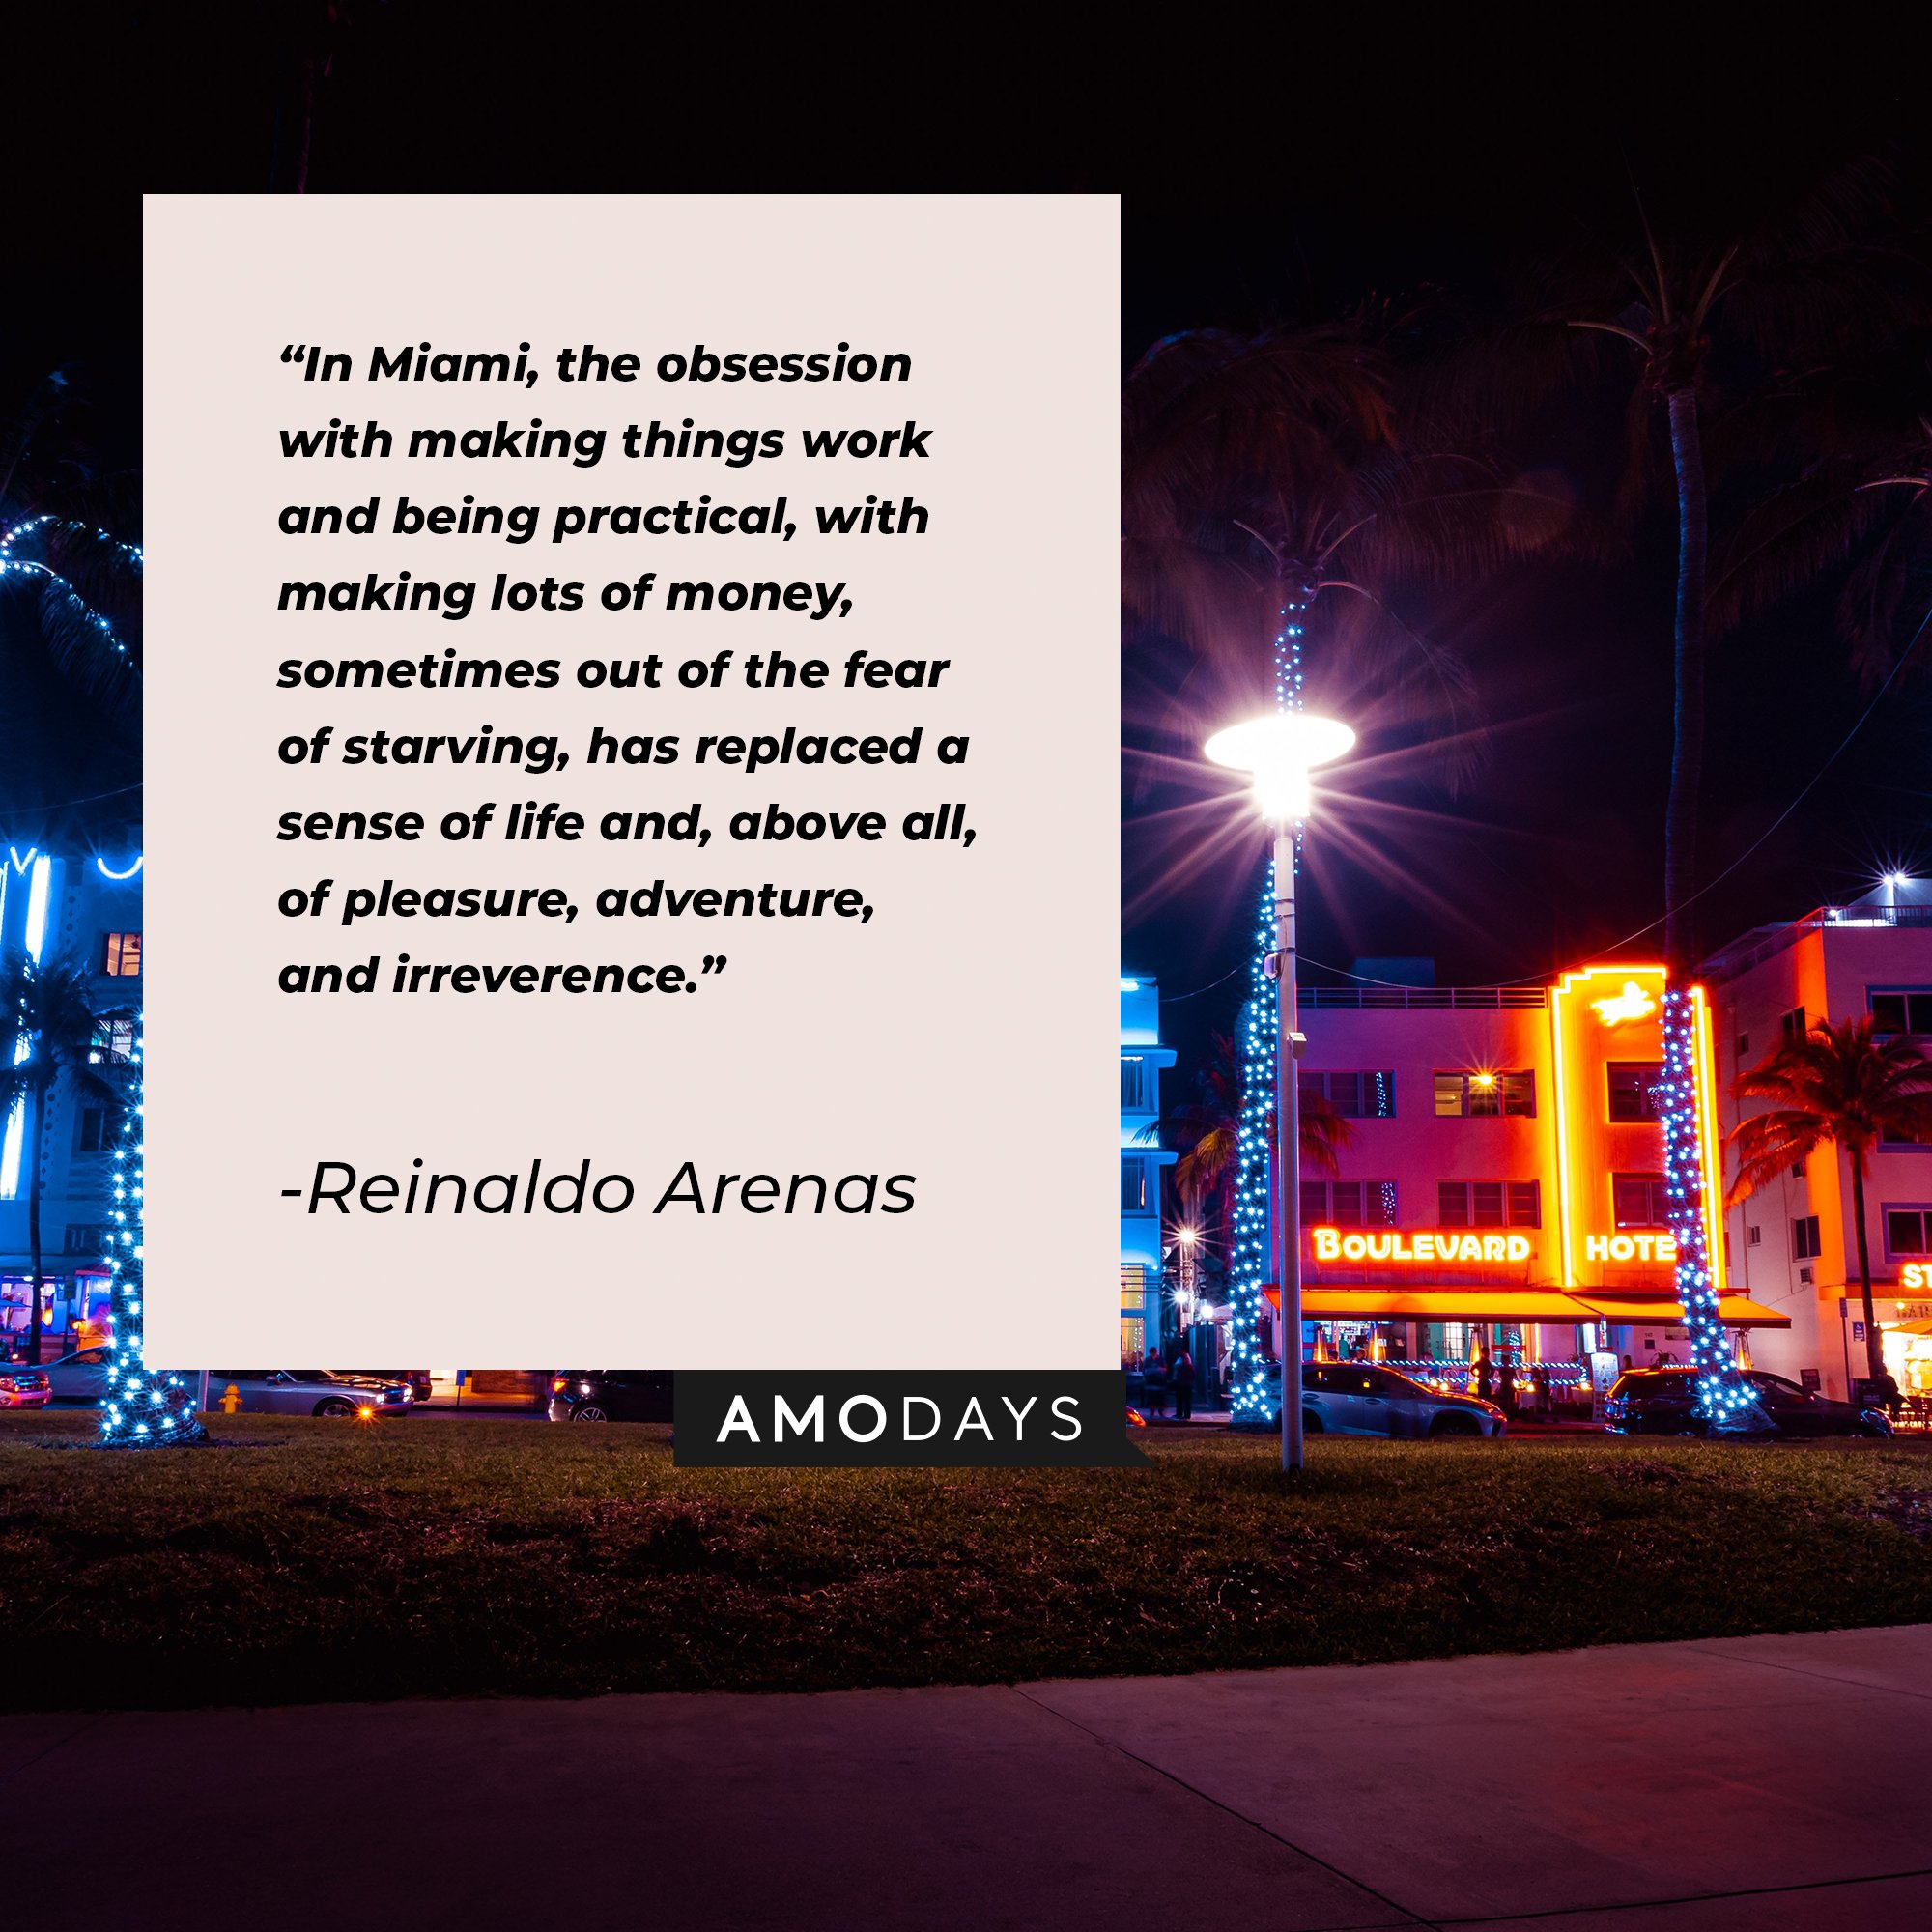  Reinaldo Arenas’s quotes: "In Miami, the obsession with making things work and being practical, with making lots of money, sometimes out of the fear of starving, has replaced a sense of life and, above all, of pleasure, adventure, and irreverence." | Image: AmoDays